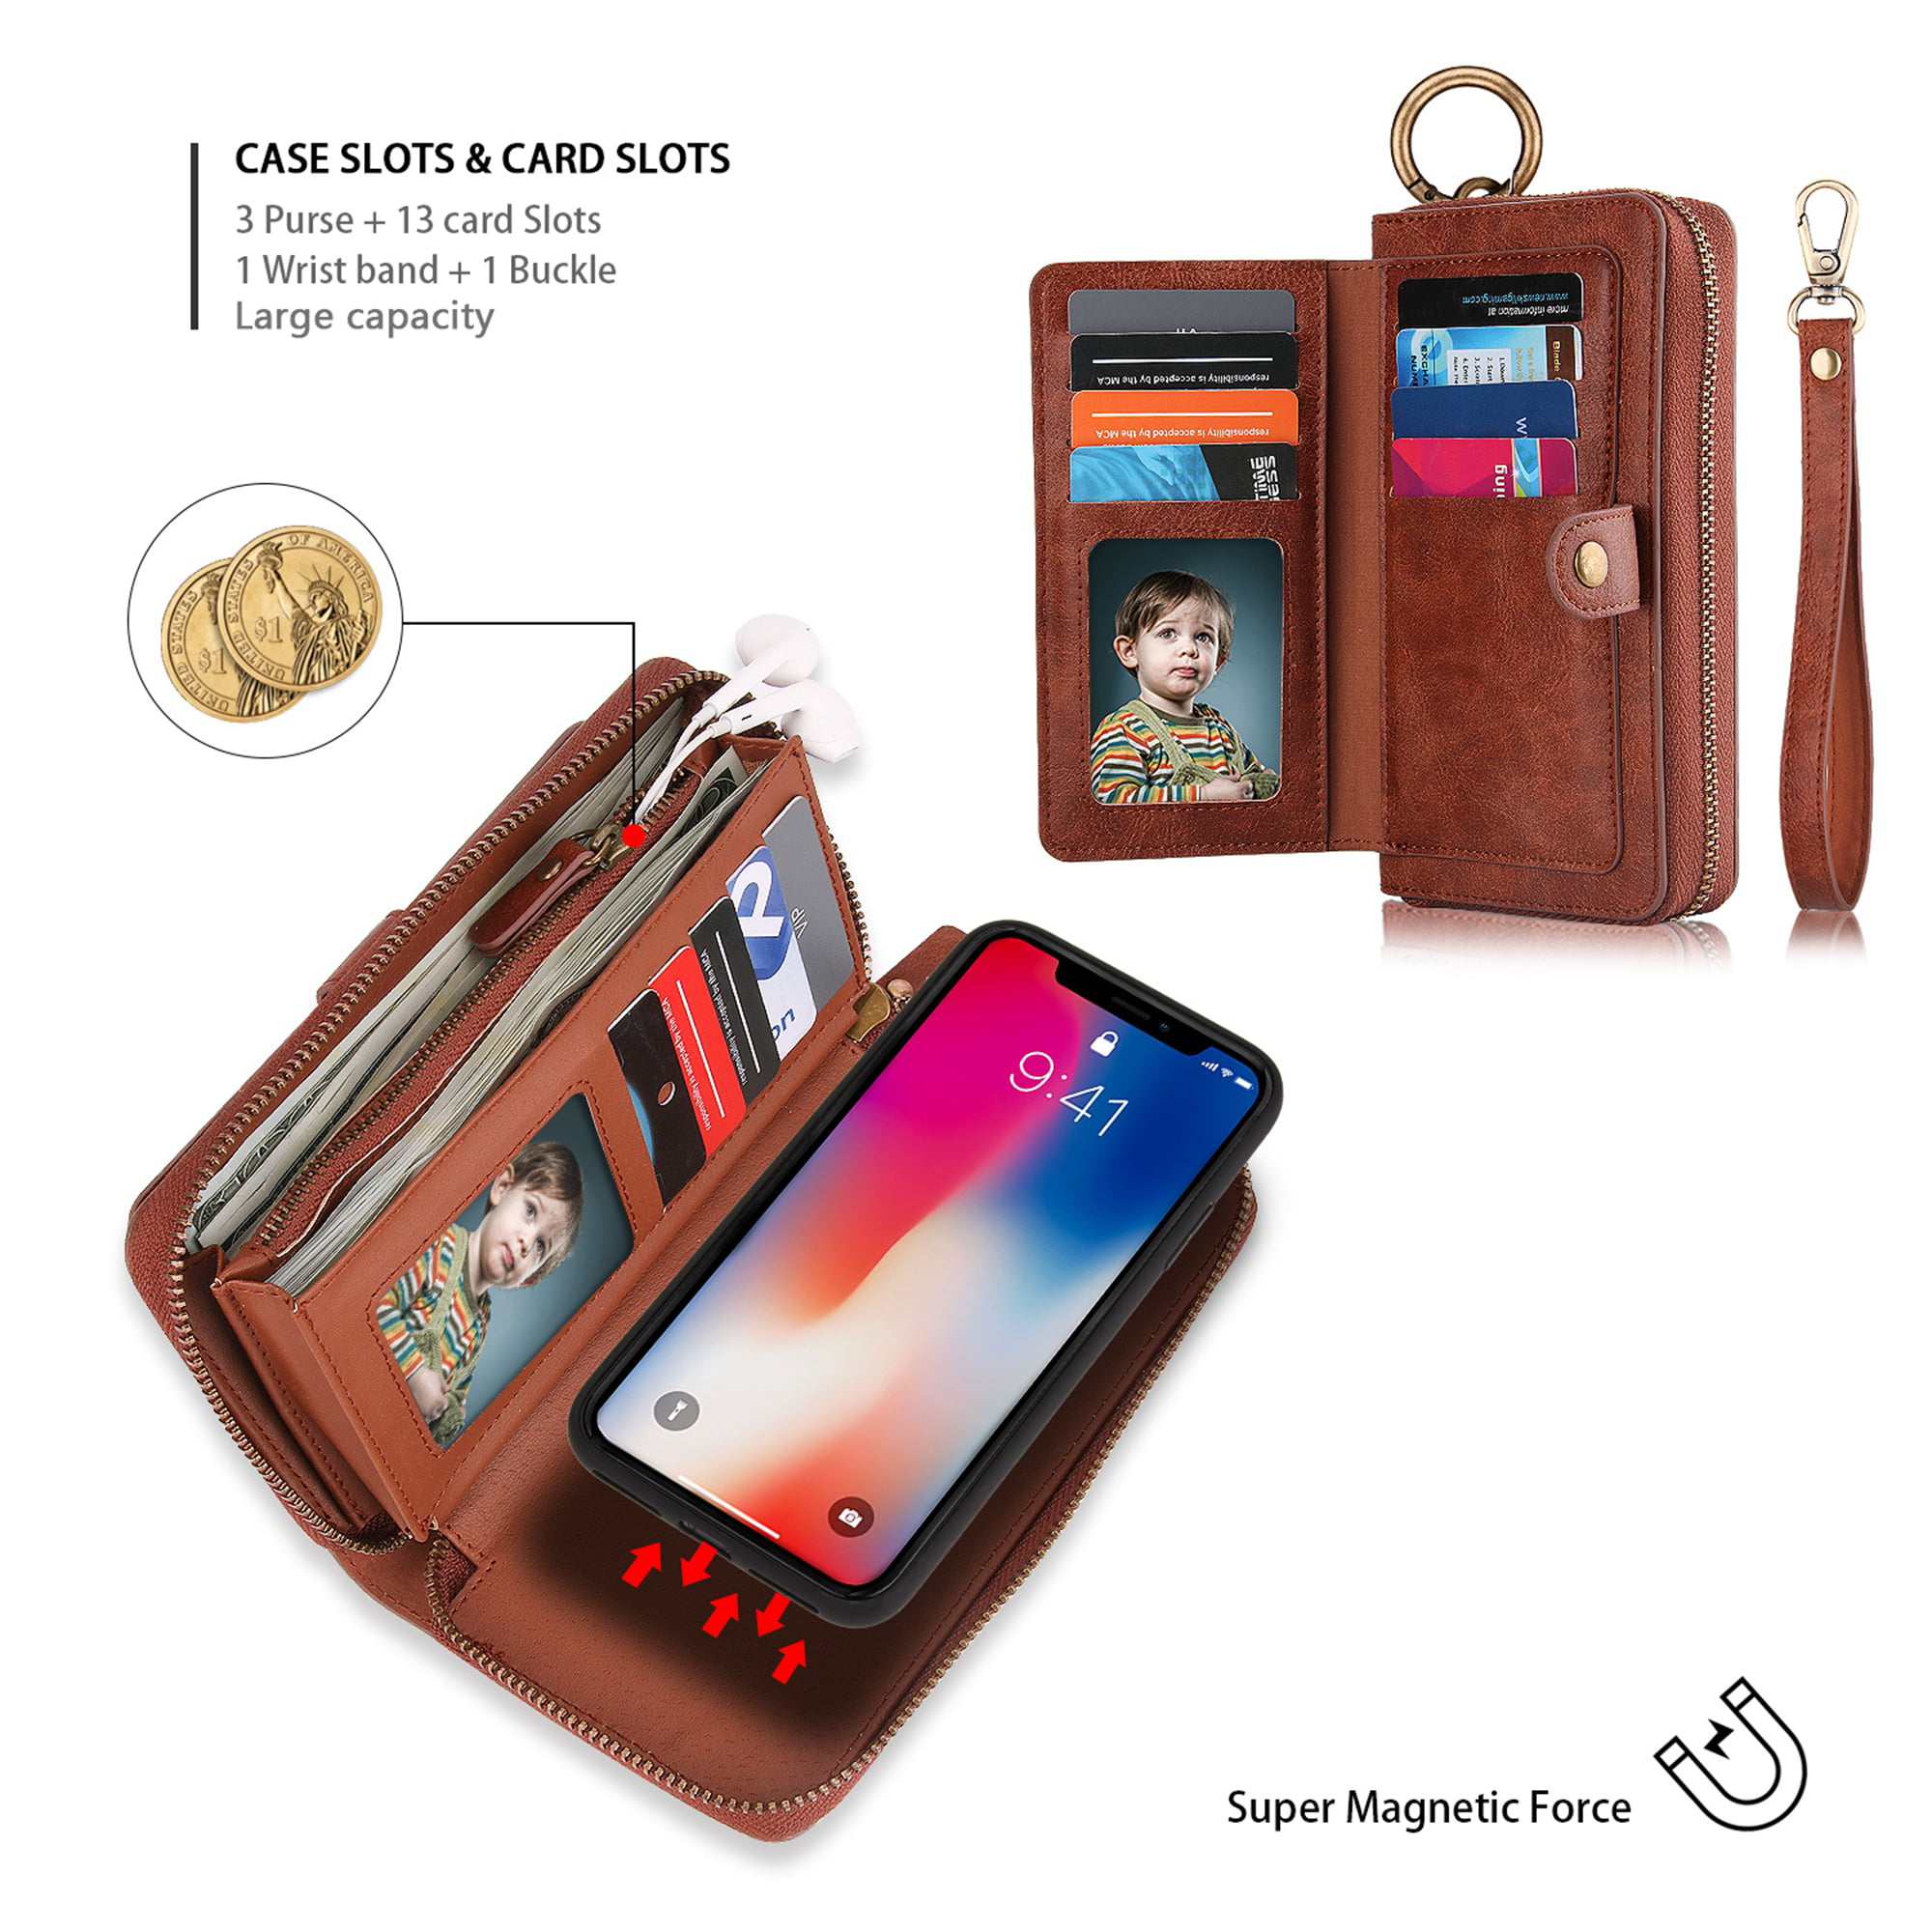 iPhone Xs Max Case,iPhone Xs Max Wallet Case with Magnetic Detachable Case,9 Card Slots,Wrist Strap, CASEOWL 2 in 1 Folio Flip Premium PU Leather